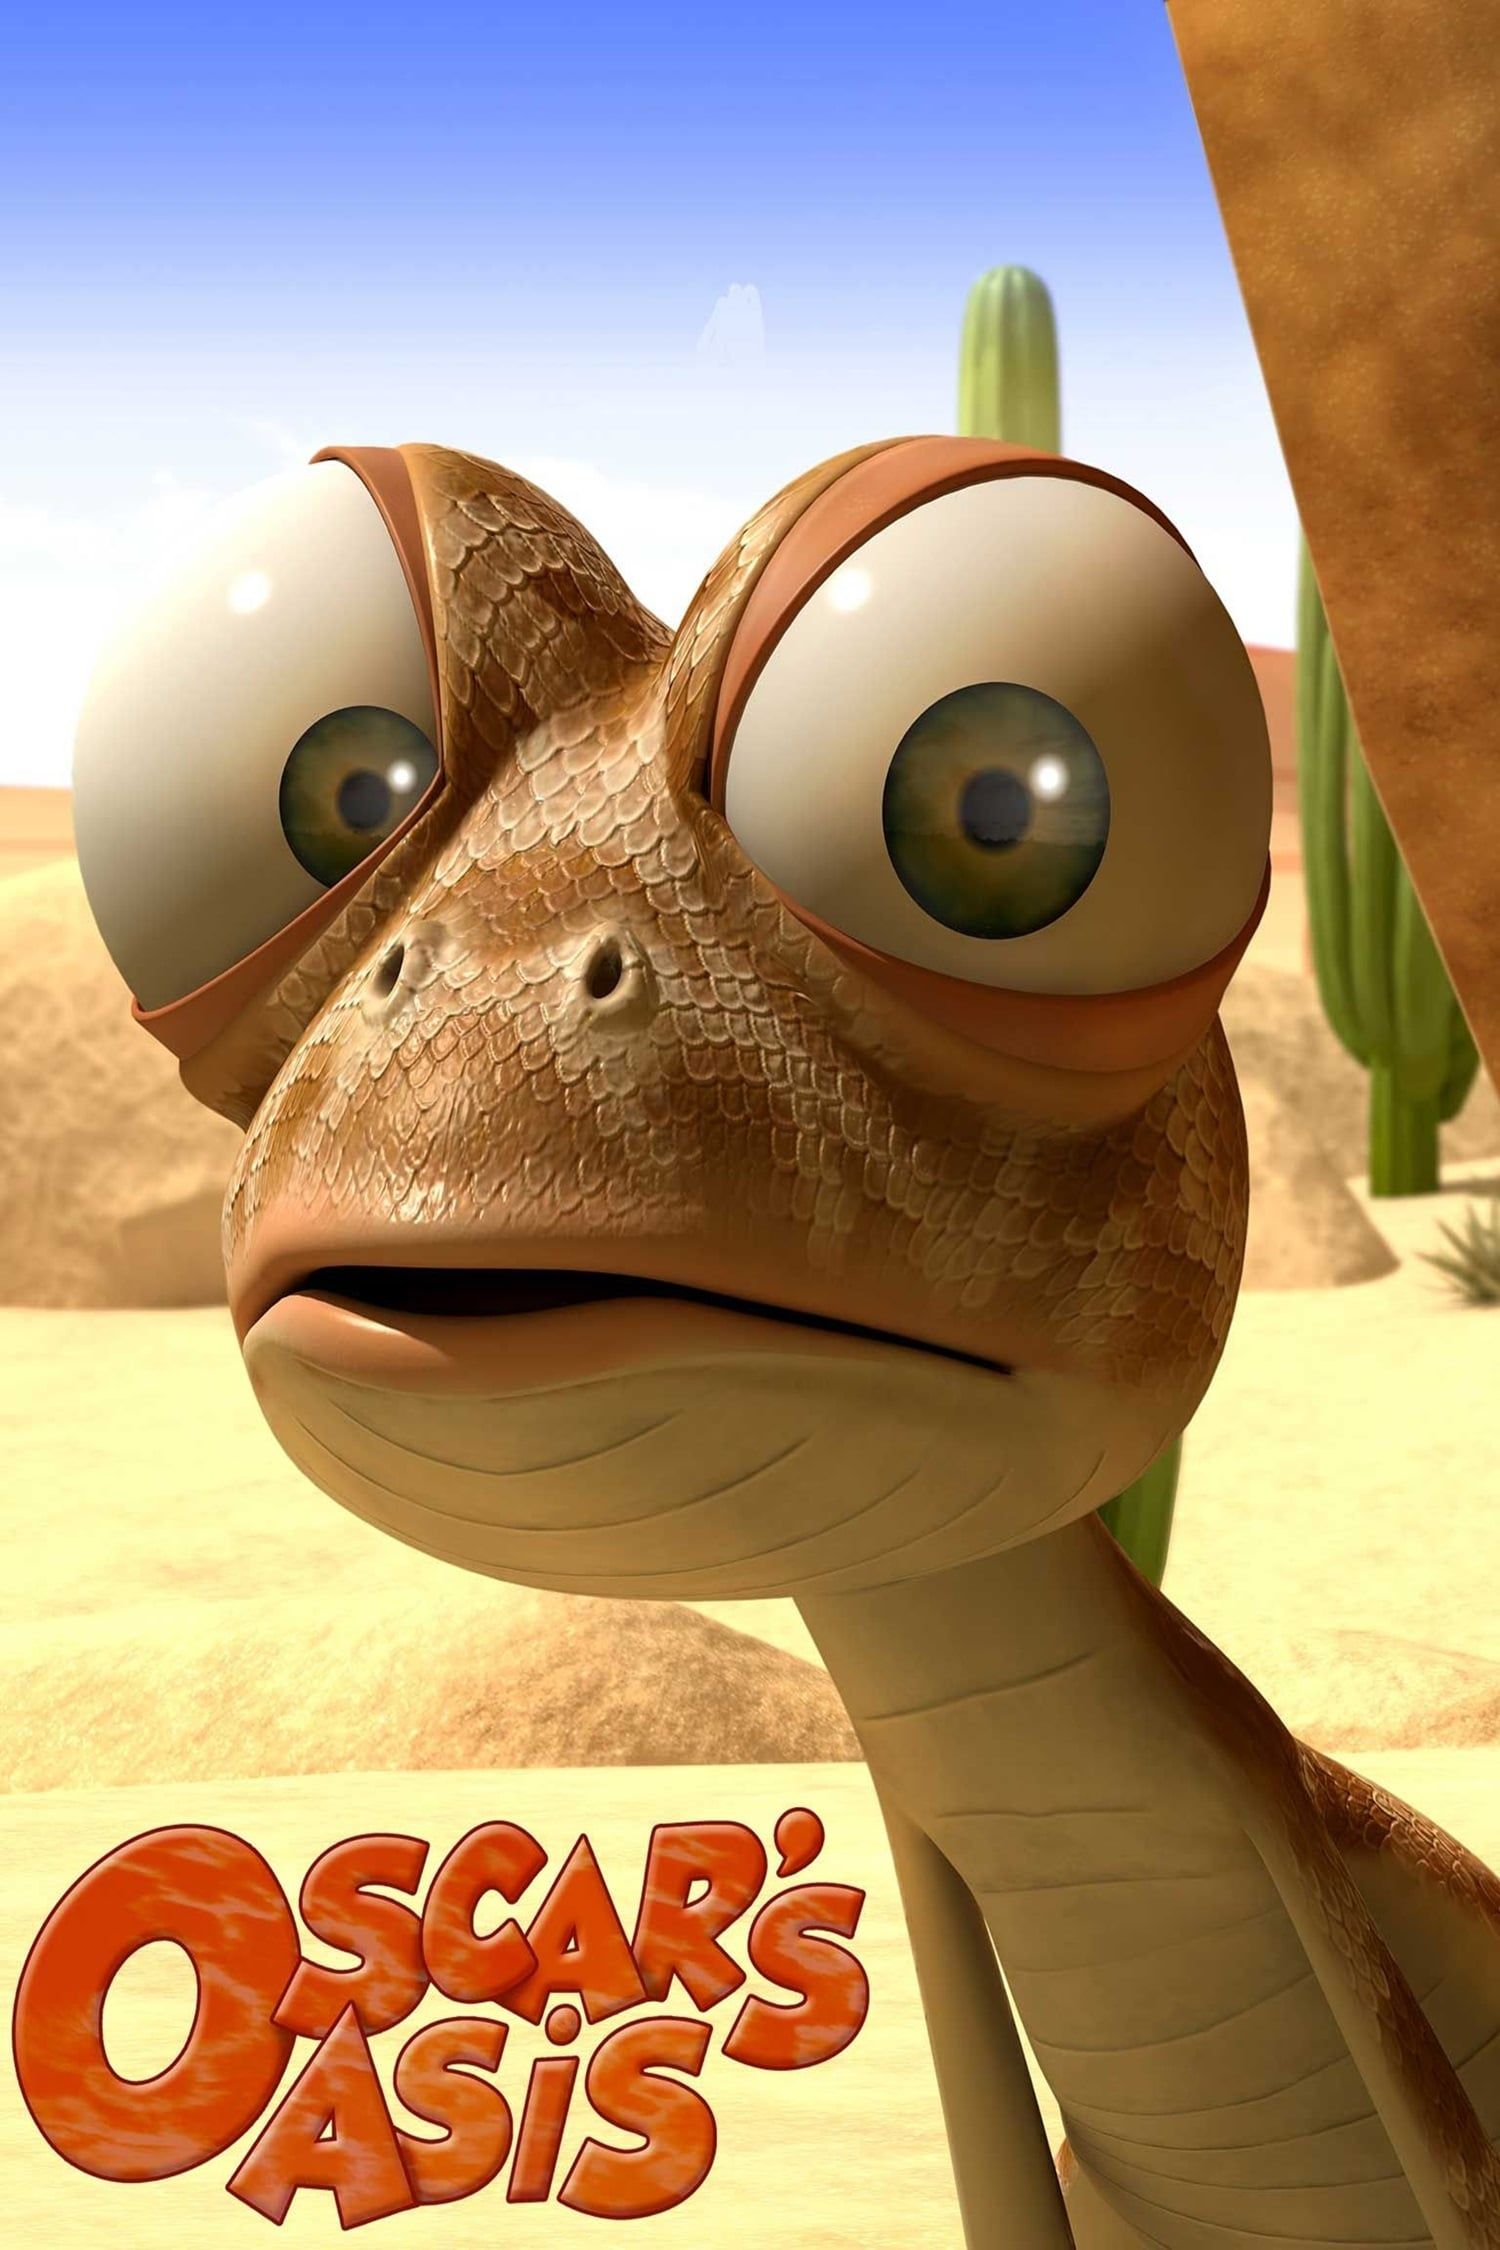 Catch the Hilarious Cartoon Series from TeamTo,”Oscar's Oasis,” On Netflix!